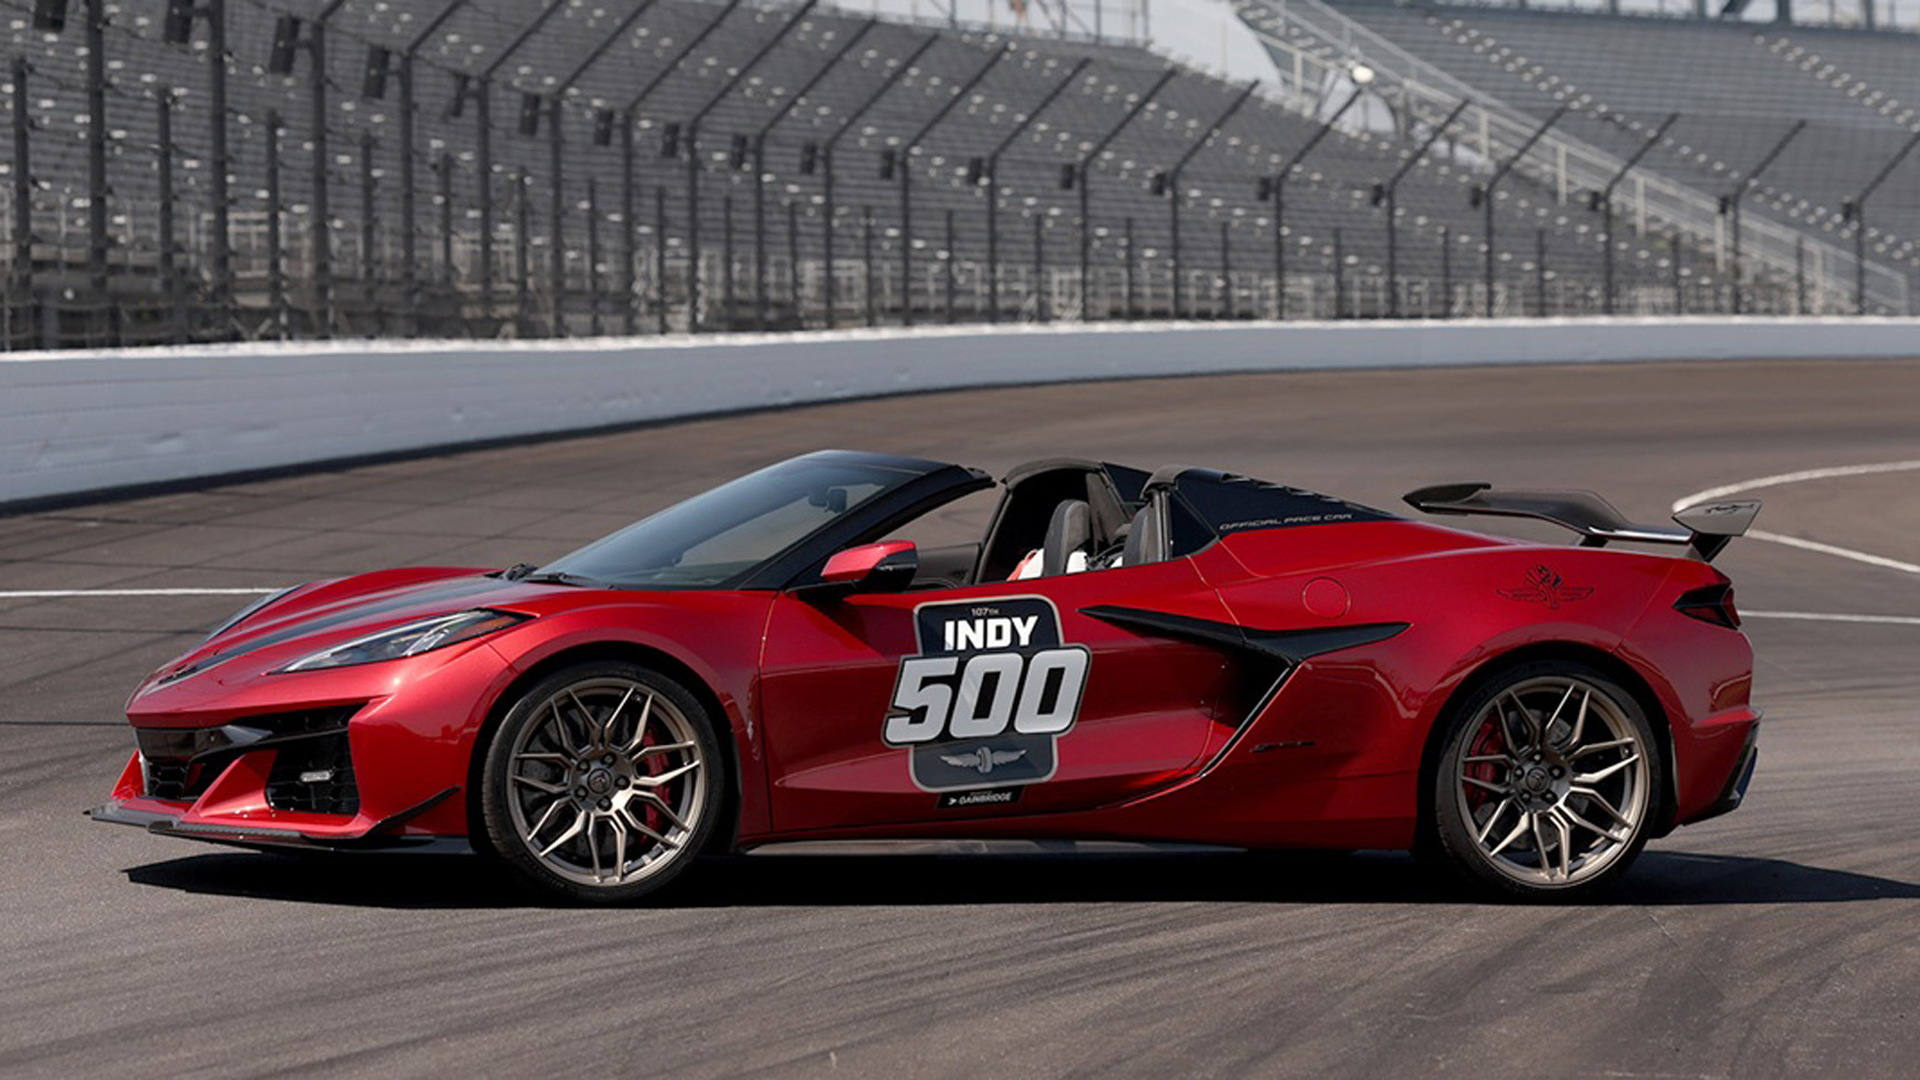 2023 Chevrolet Corvette Z06 named official pace car of the 2023 Indianapolis 500